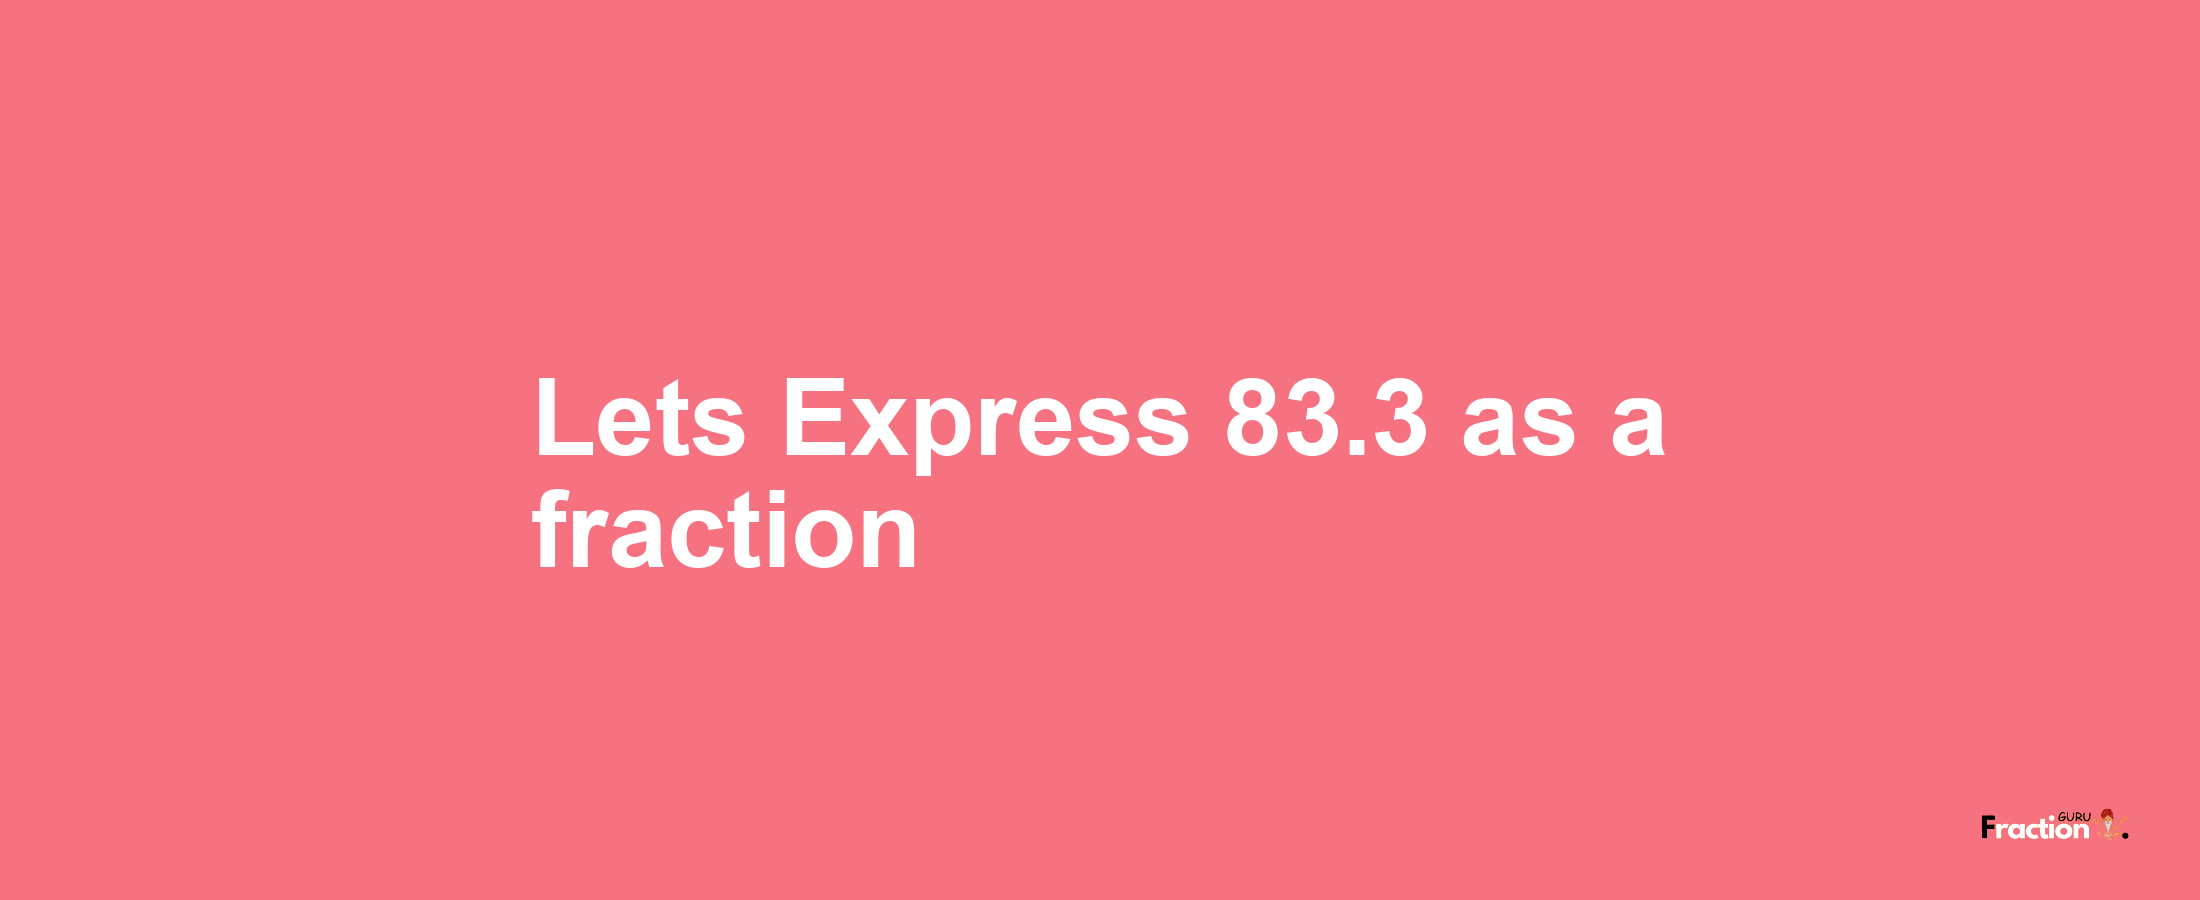 Lets Express 83.3 as afraction